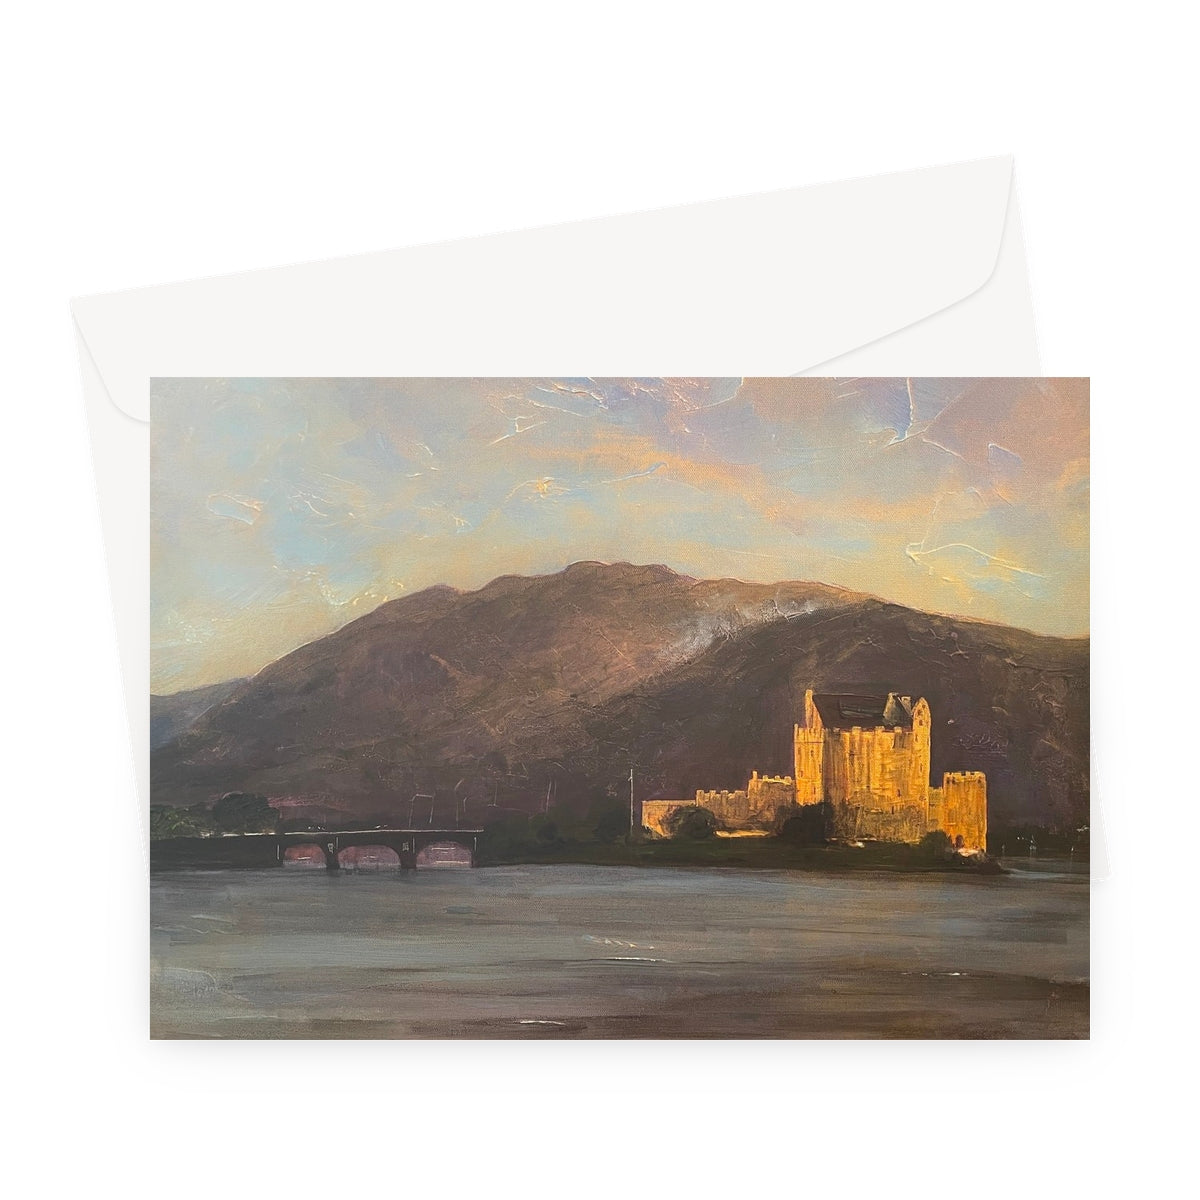 Eilean Donan Castle Art Gifts Greeting Card-Greetings Cards-Historic & Iconic Scotland Art Gallery-A5 Landscape-10 Cards-Paintings, Prints, Homeware, Art Gifts From Scotland By Scottish Artist Kevin Hunter